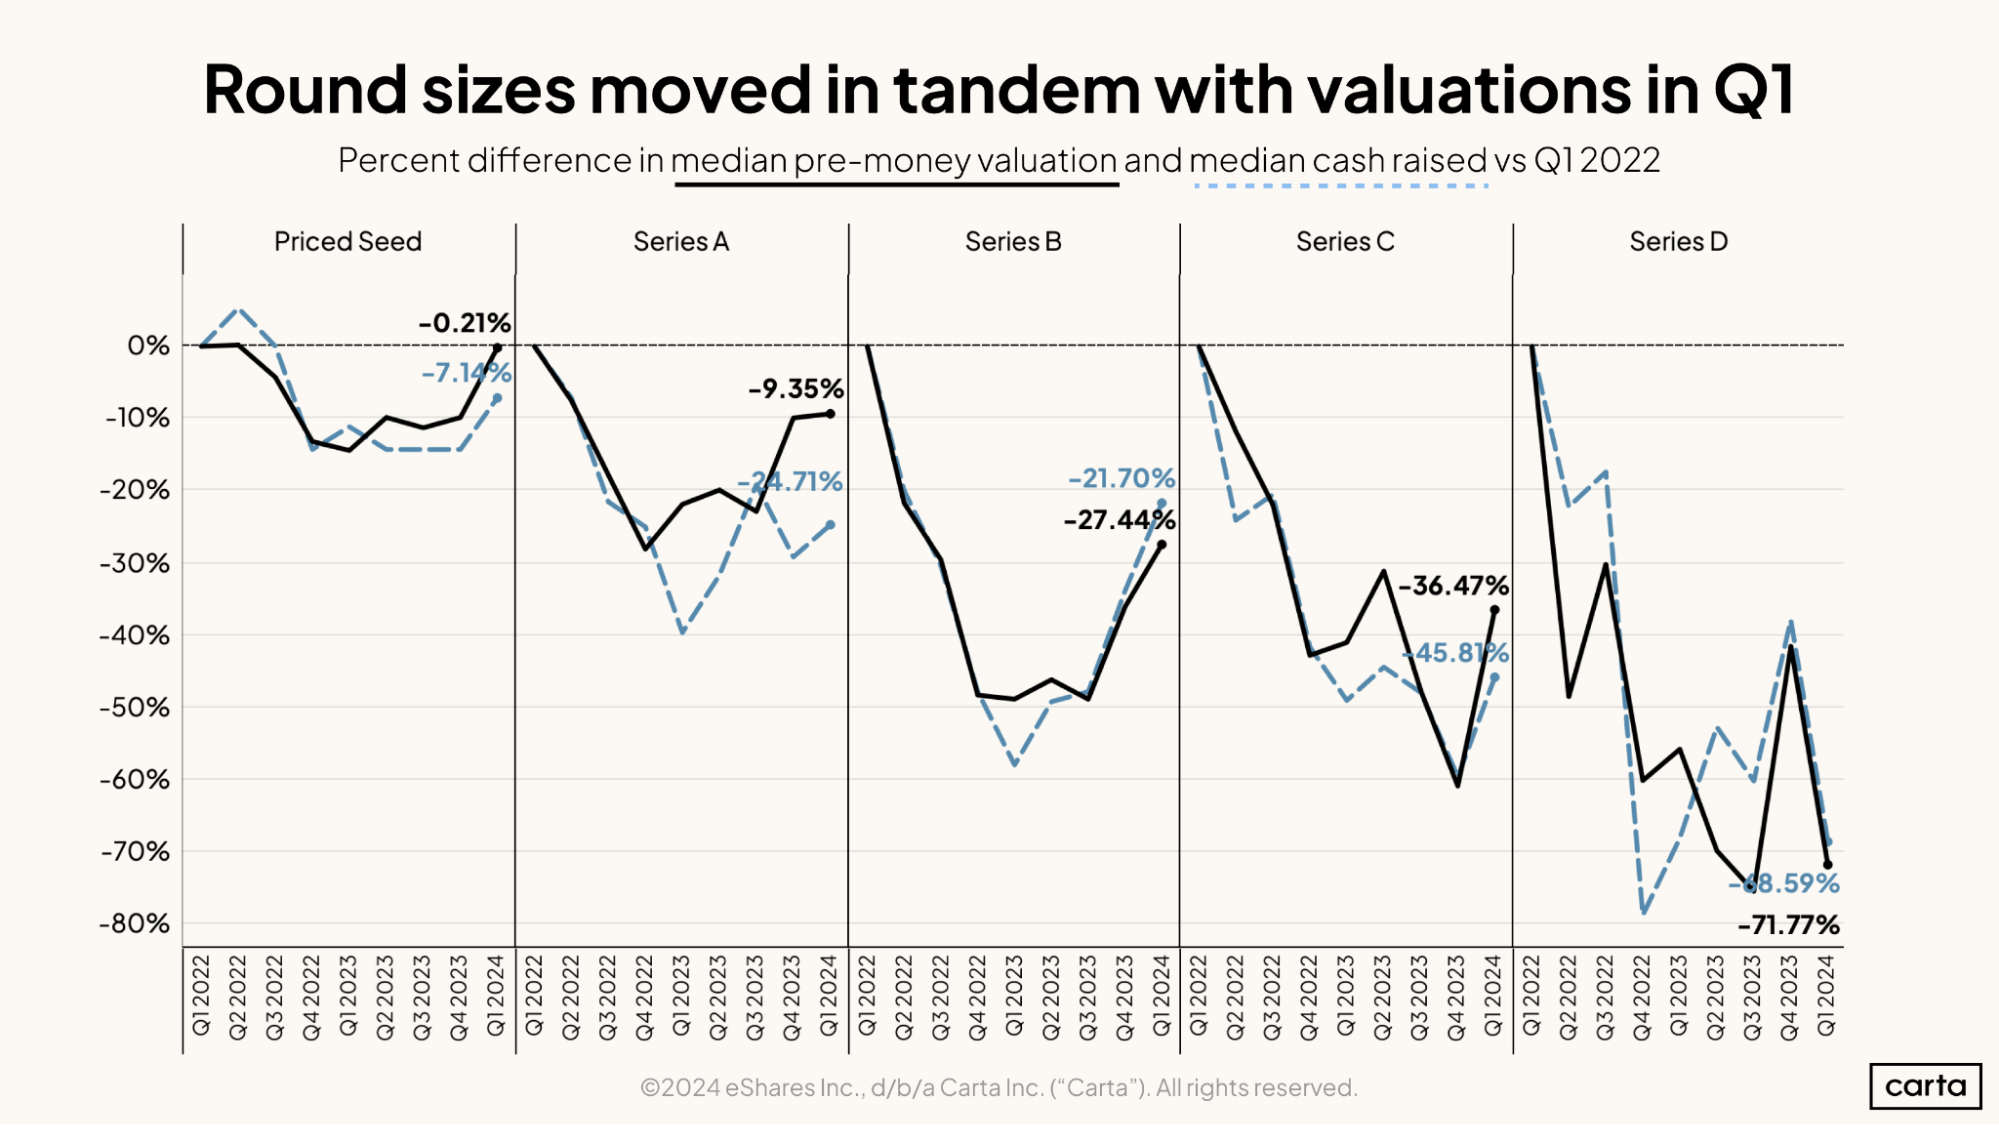 Round sizes moved in tandem with valuations in Q1